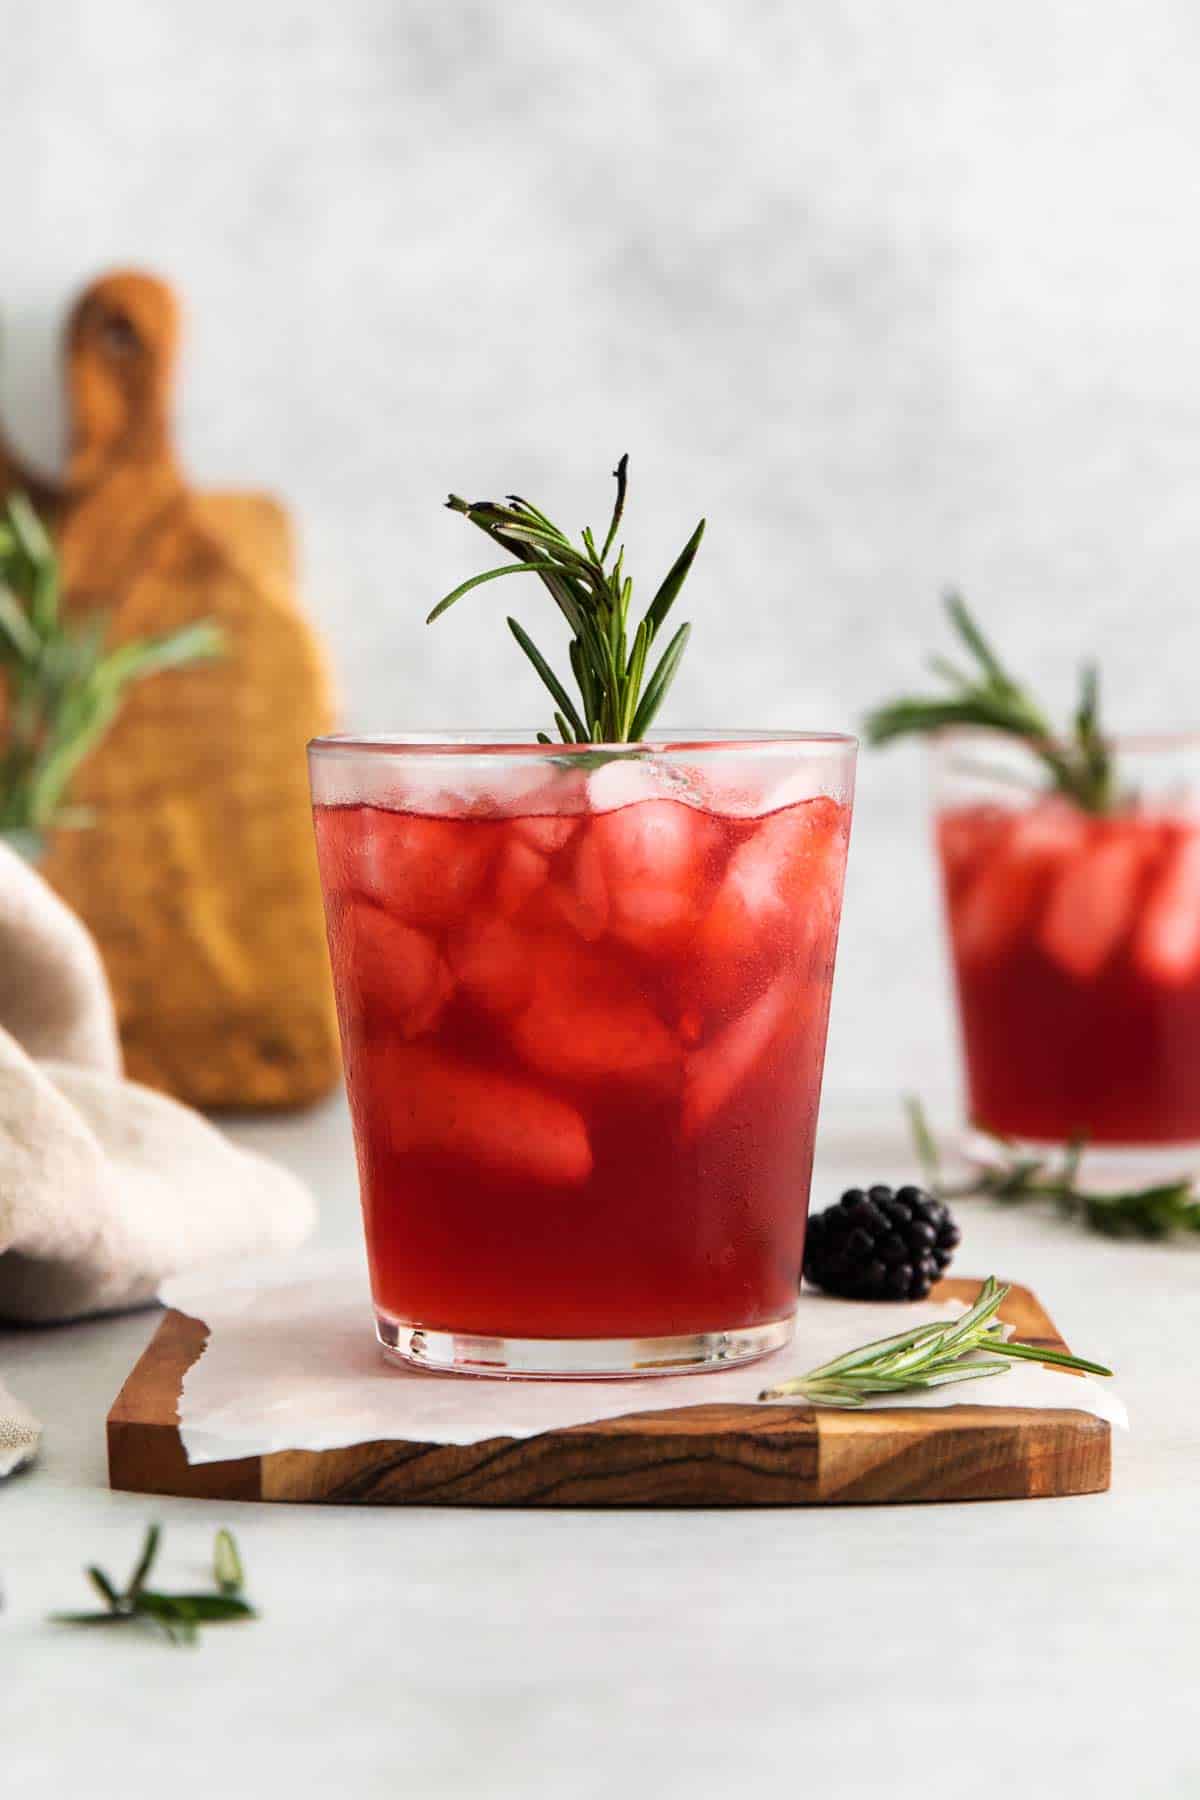 Two glasses of smoked rosemary blackberry whiskey sour cocktail garnished with rosemary, served on a wooden coaster